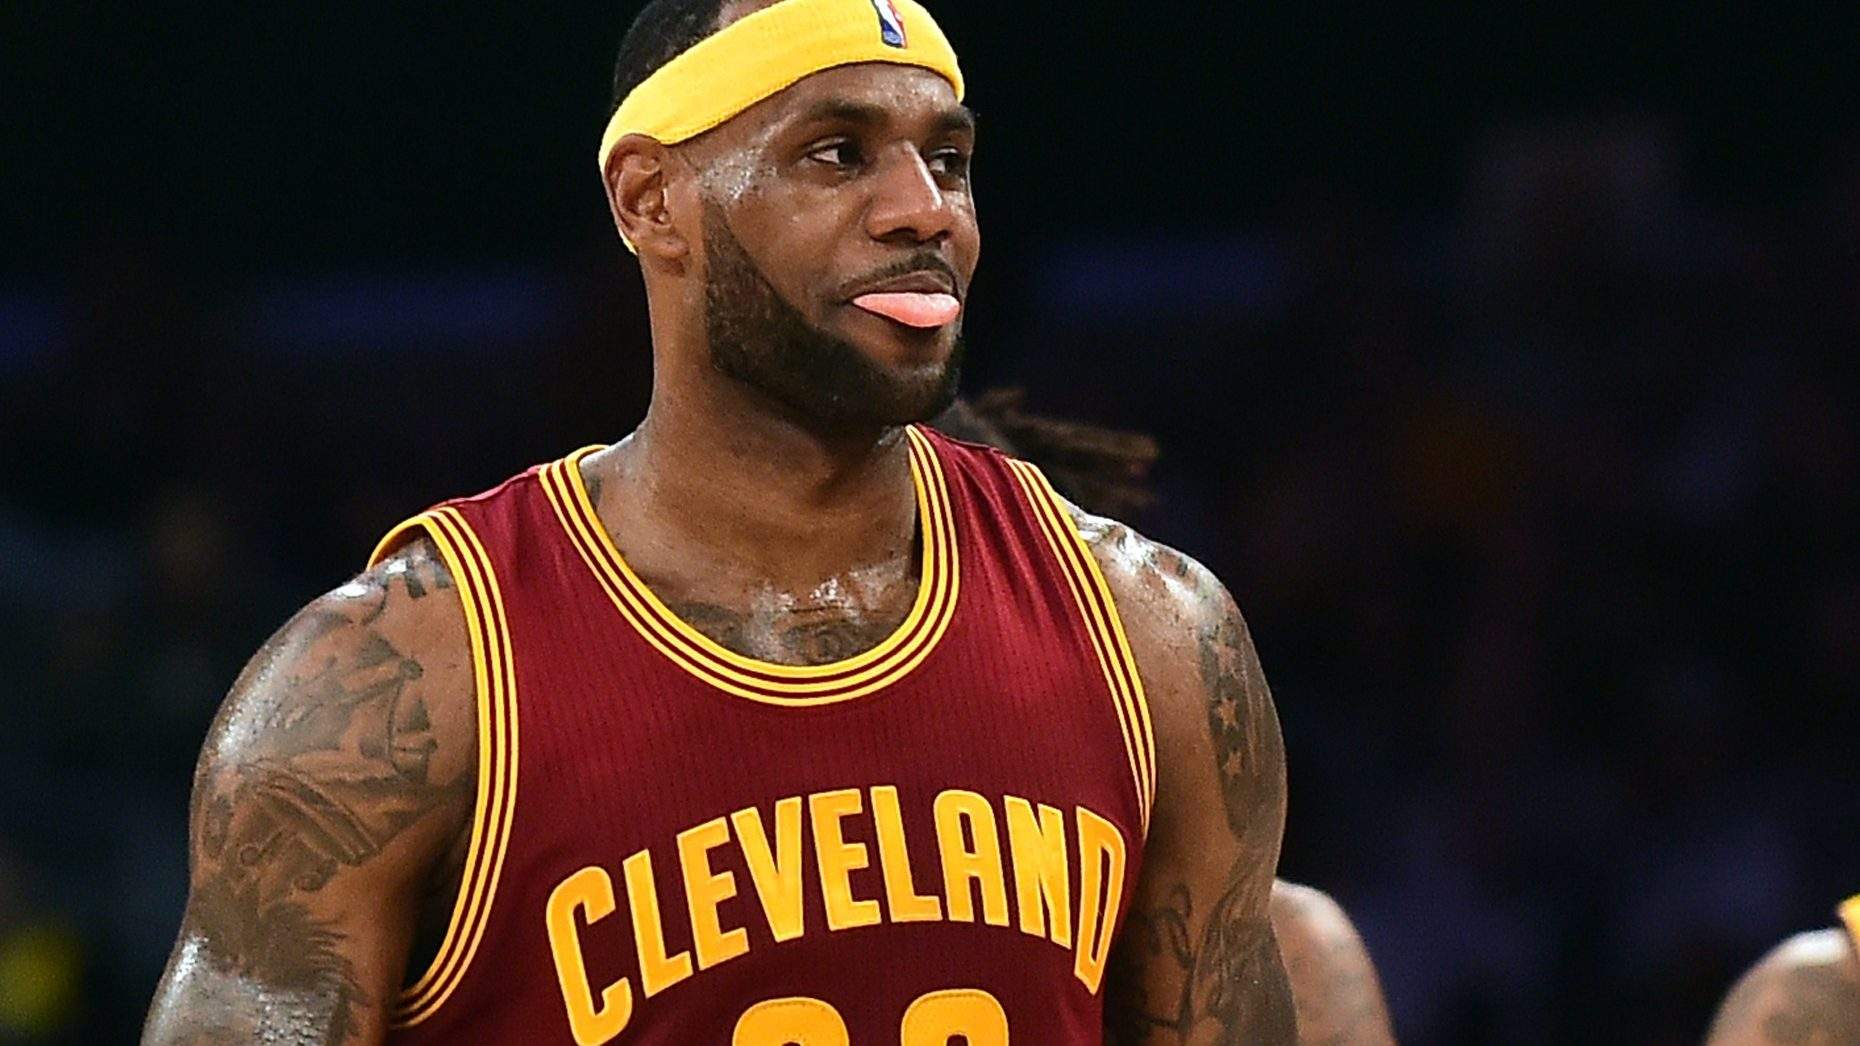 lebronjames tops many lists as one of the world’s best athletes of all-time...